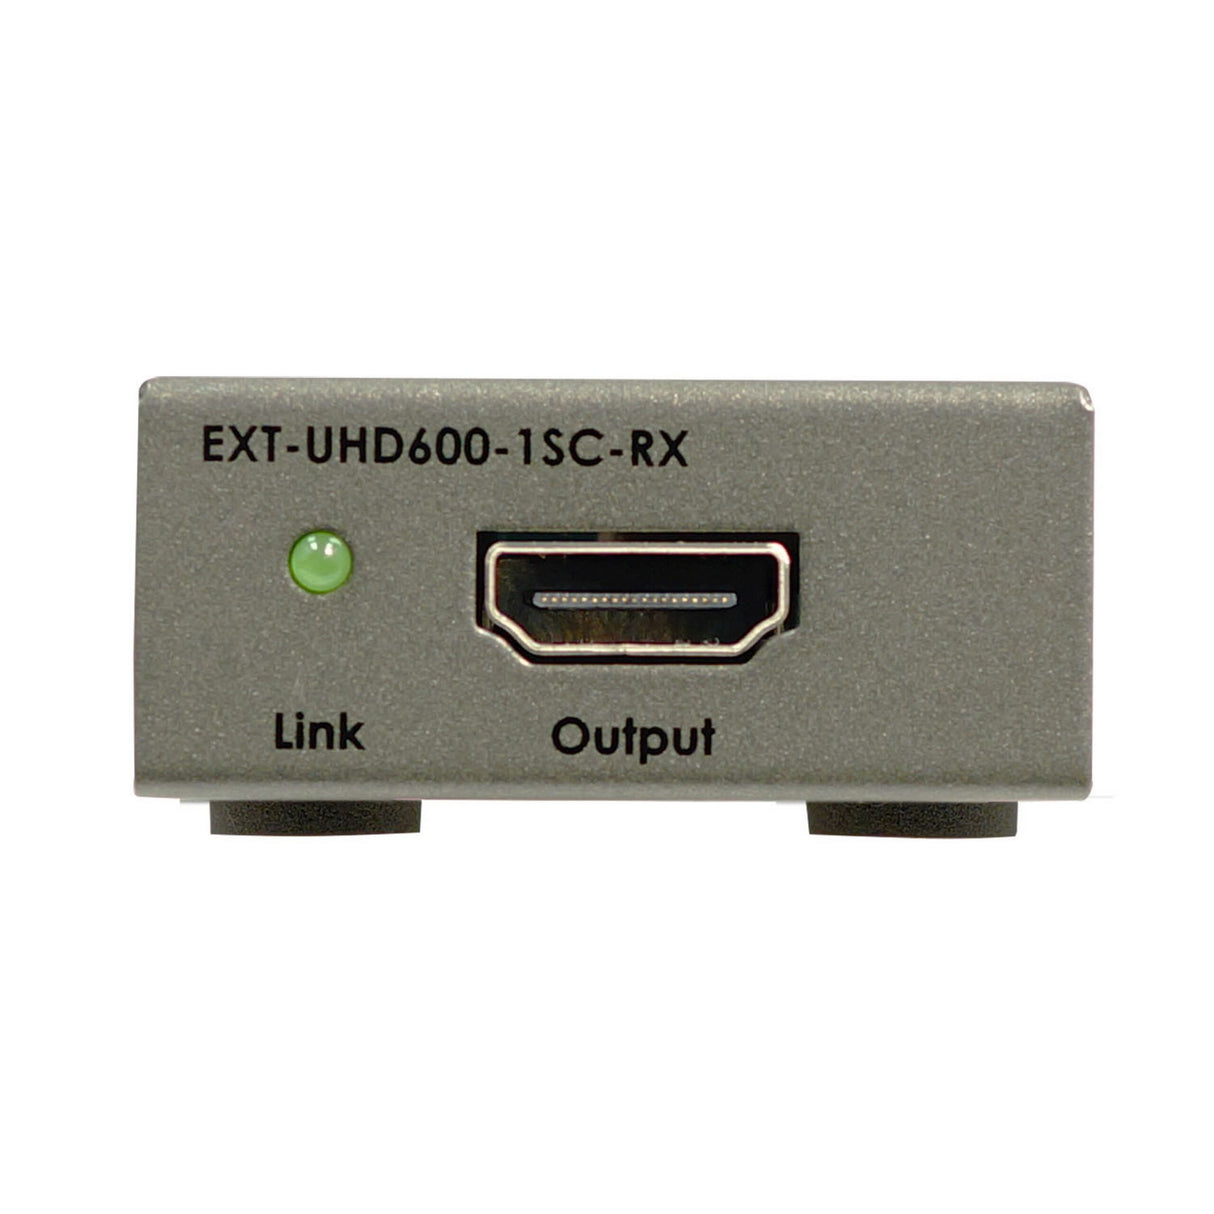 Gefen EXT-UHD600-1SC 4K Ultra HD 600 MHz Extender for HDMI over Fiber-Optic Cable